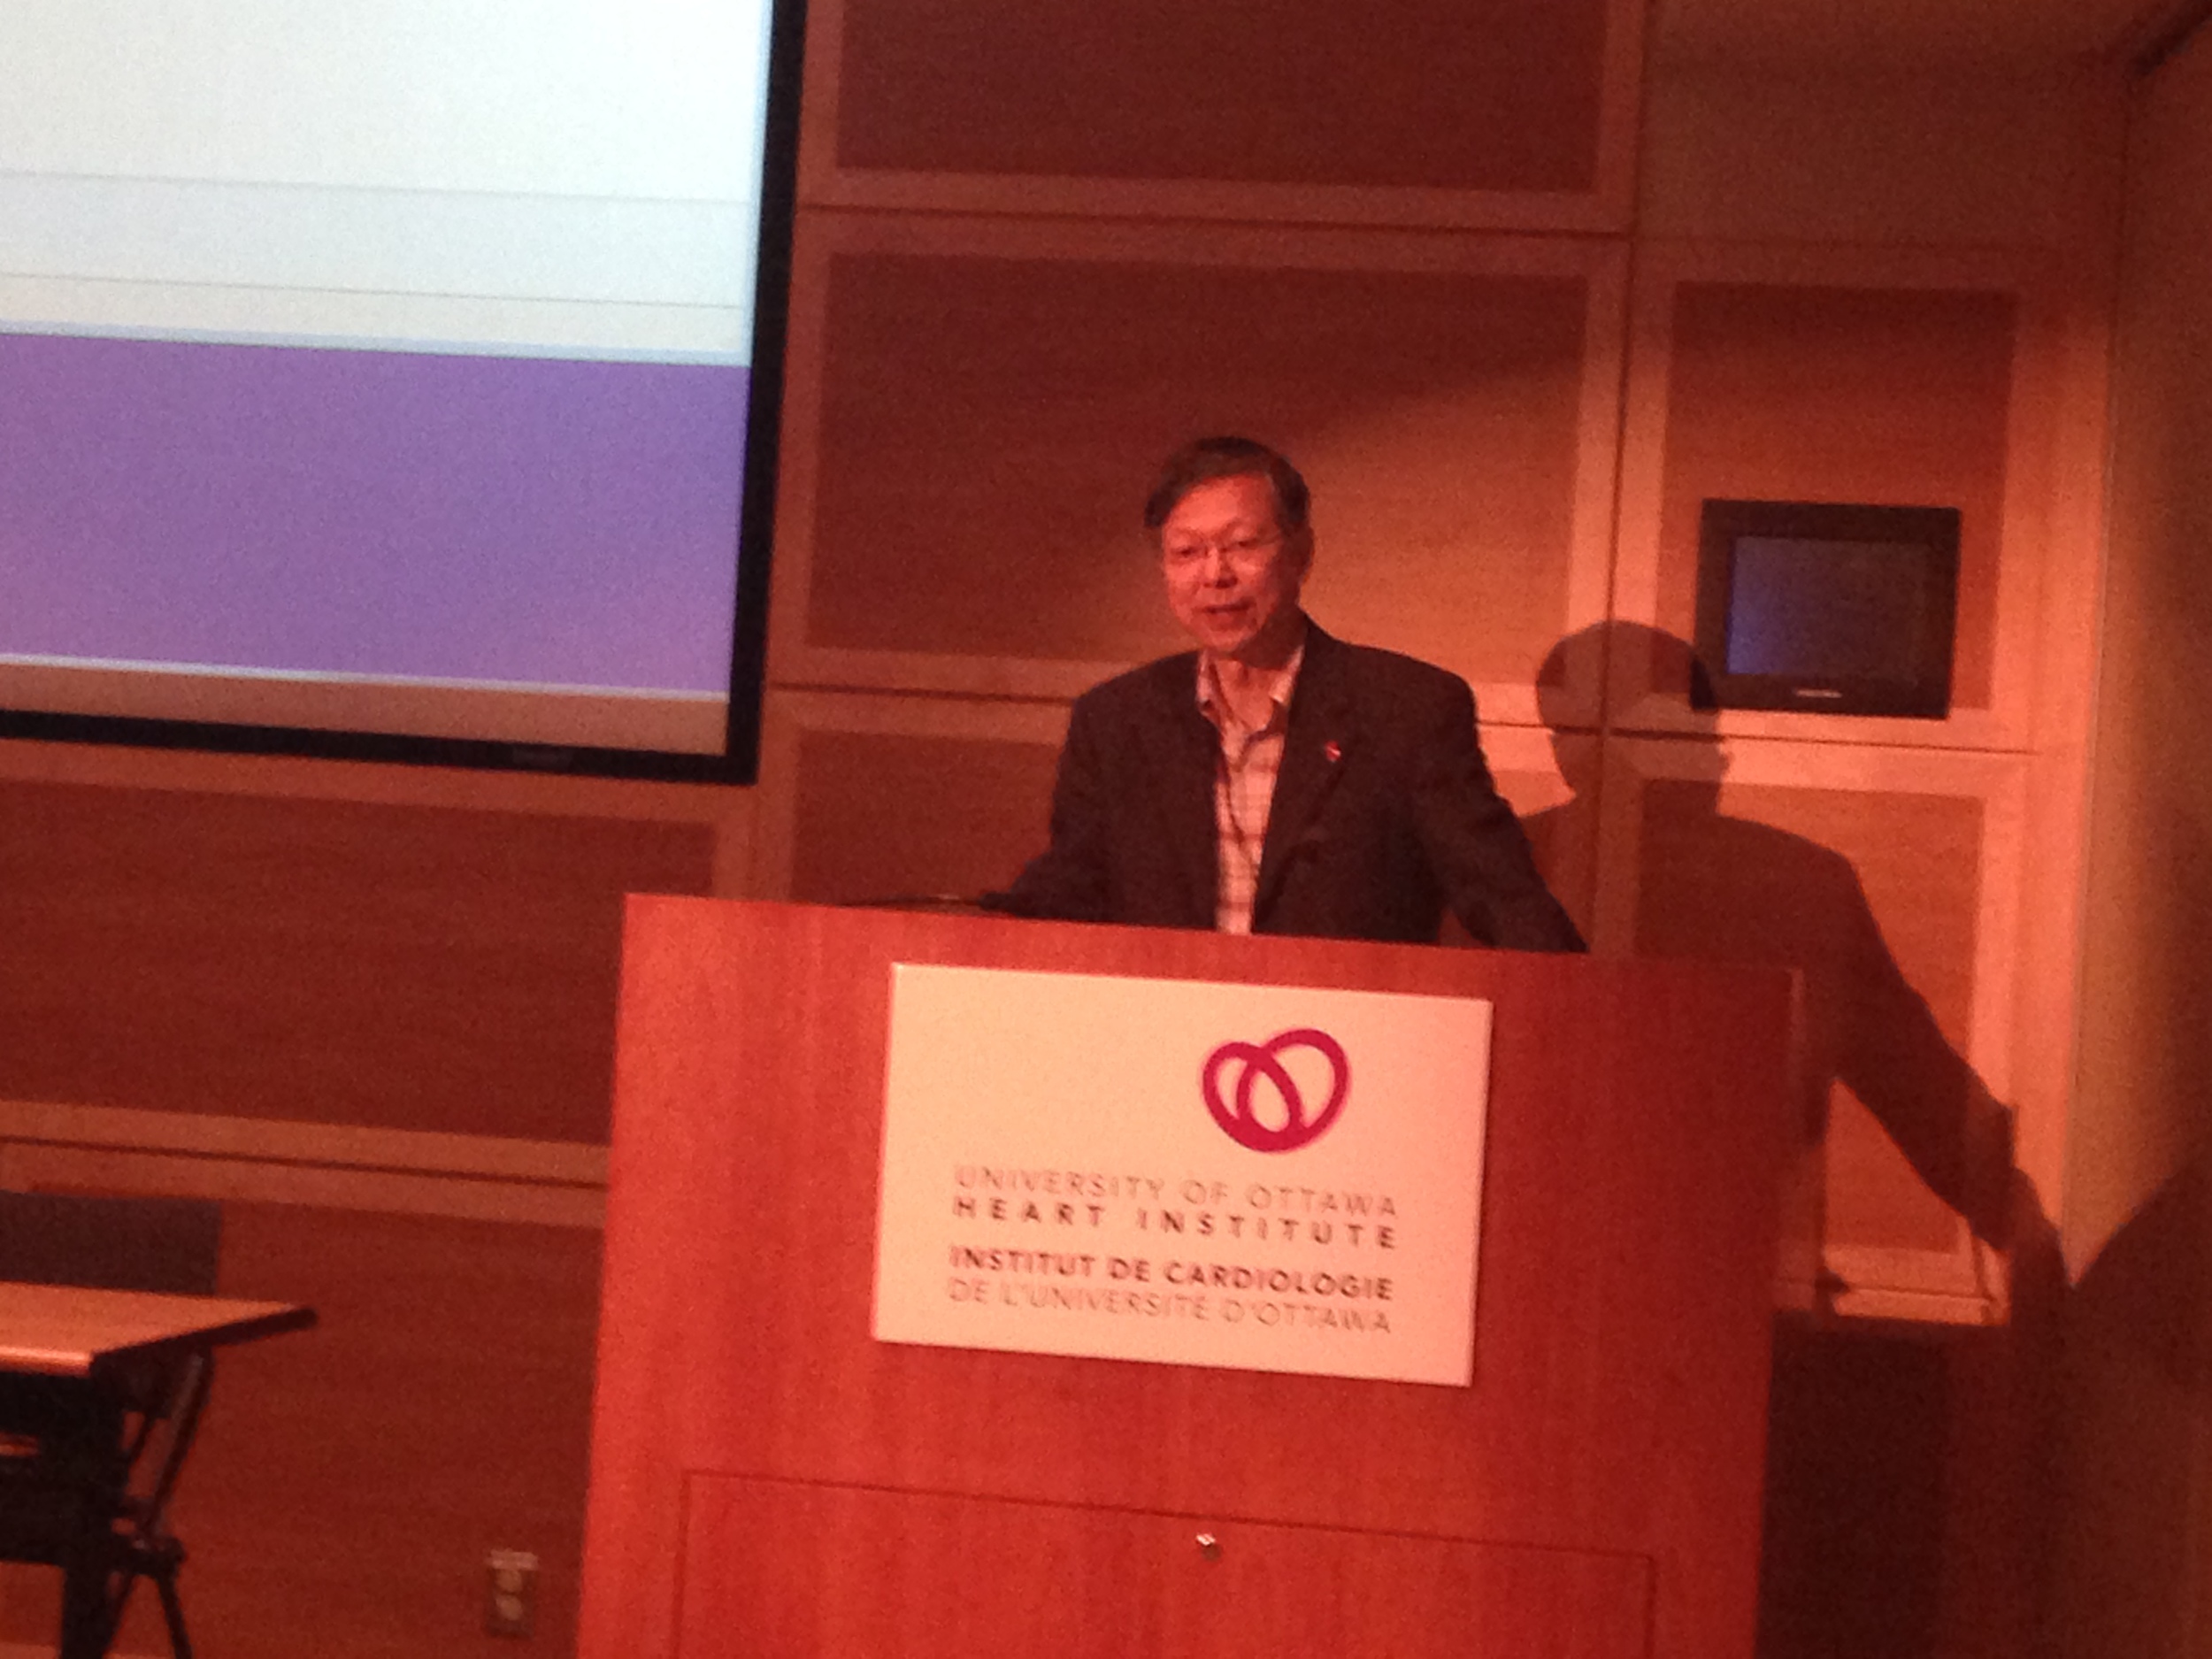 Dr Kwan-Leung Chan, UOHI - Symptoms, Diagnosis and Management of Marfan Syndrome